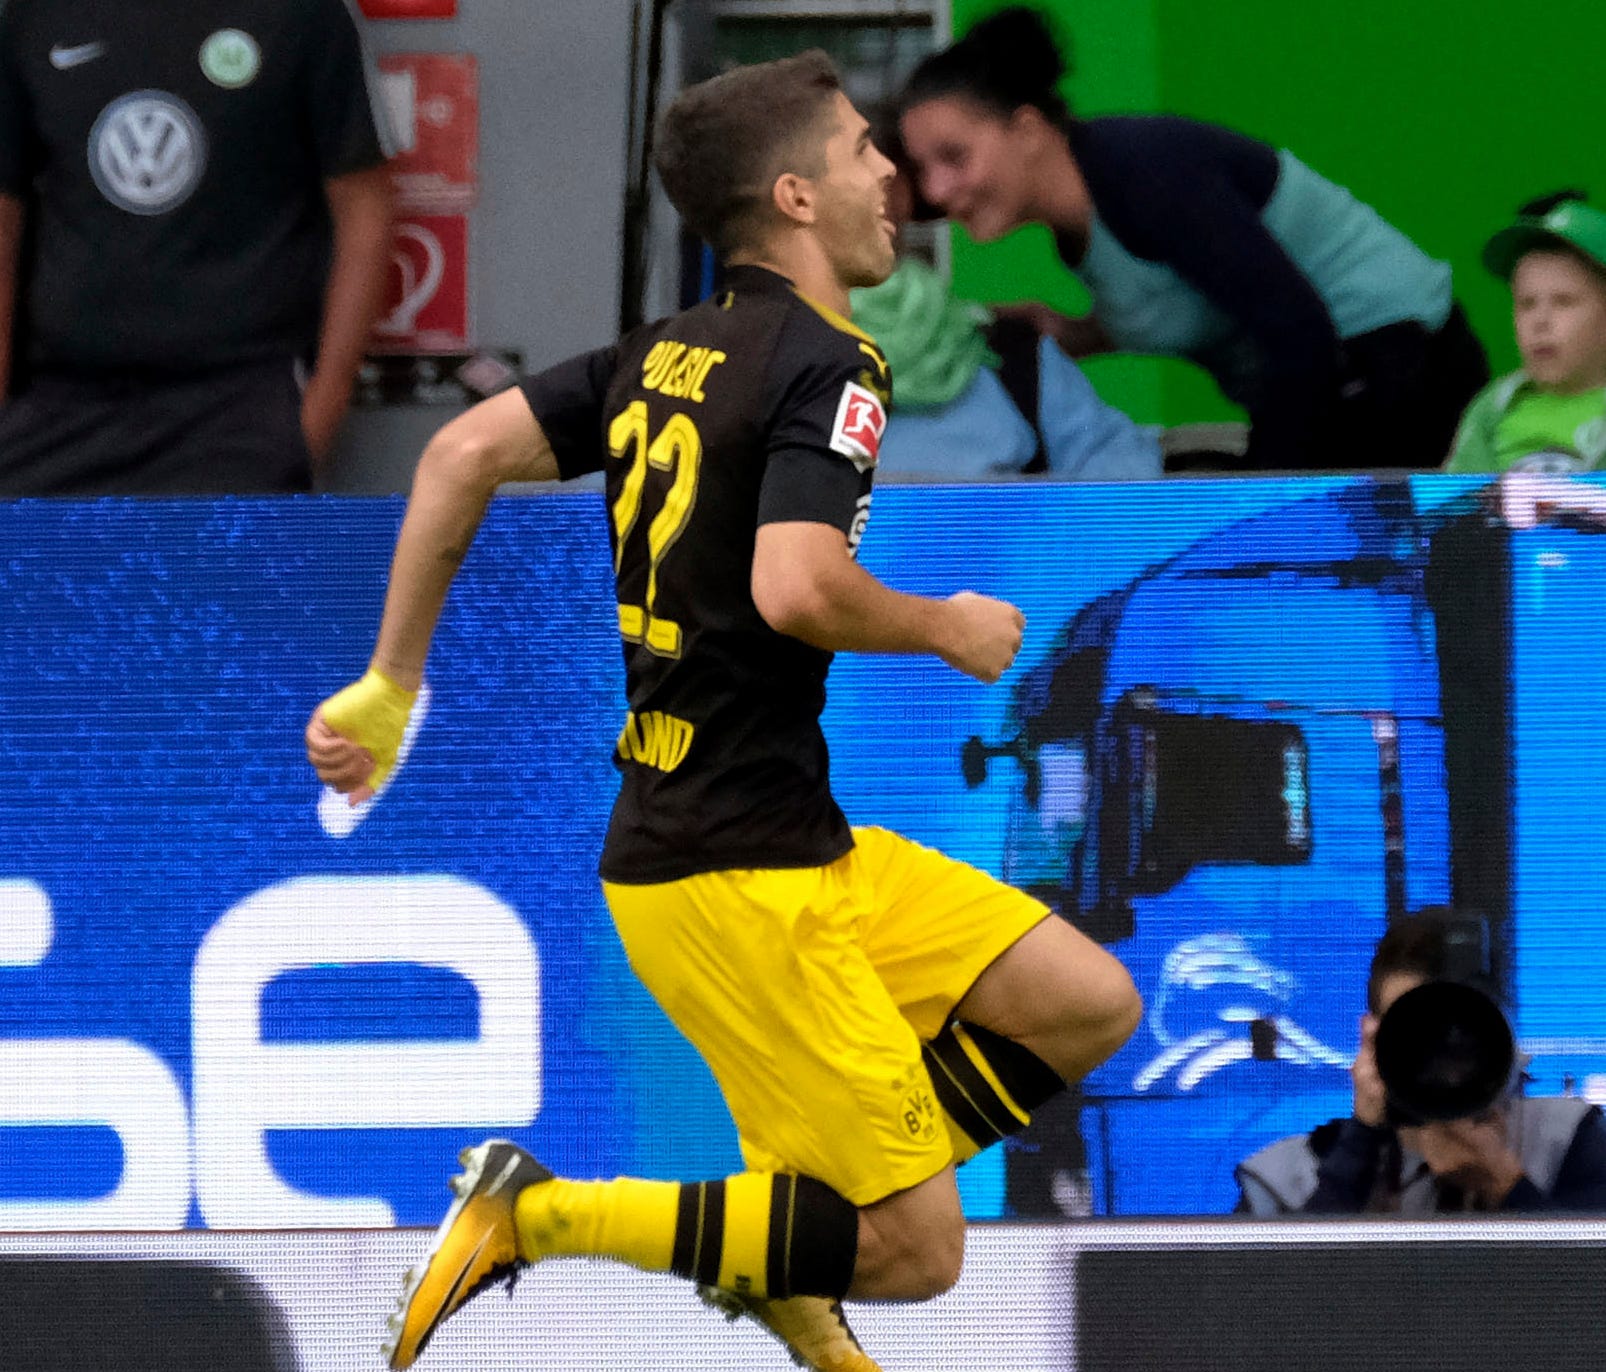 Christian Pulisic continues to improve while playing for Borussia Dortmund, which recently sold Ousmane Dembele to FC Barcelona for $125 million.